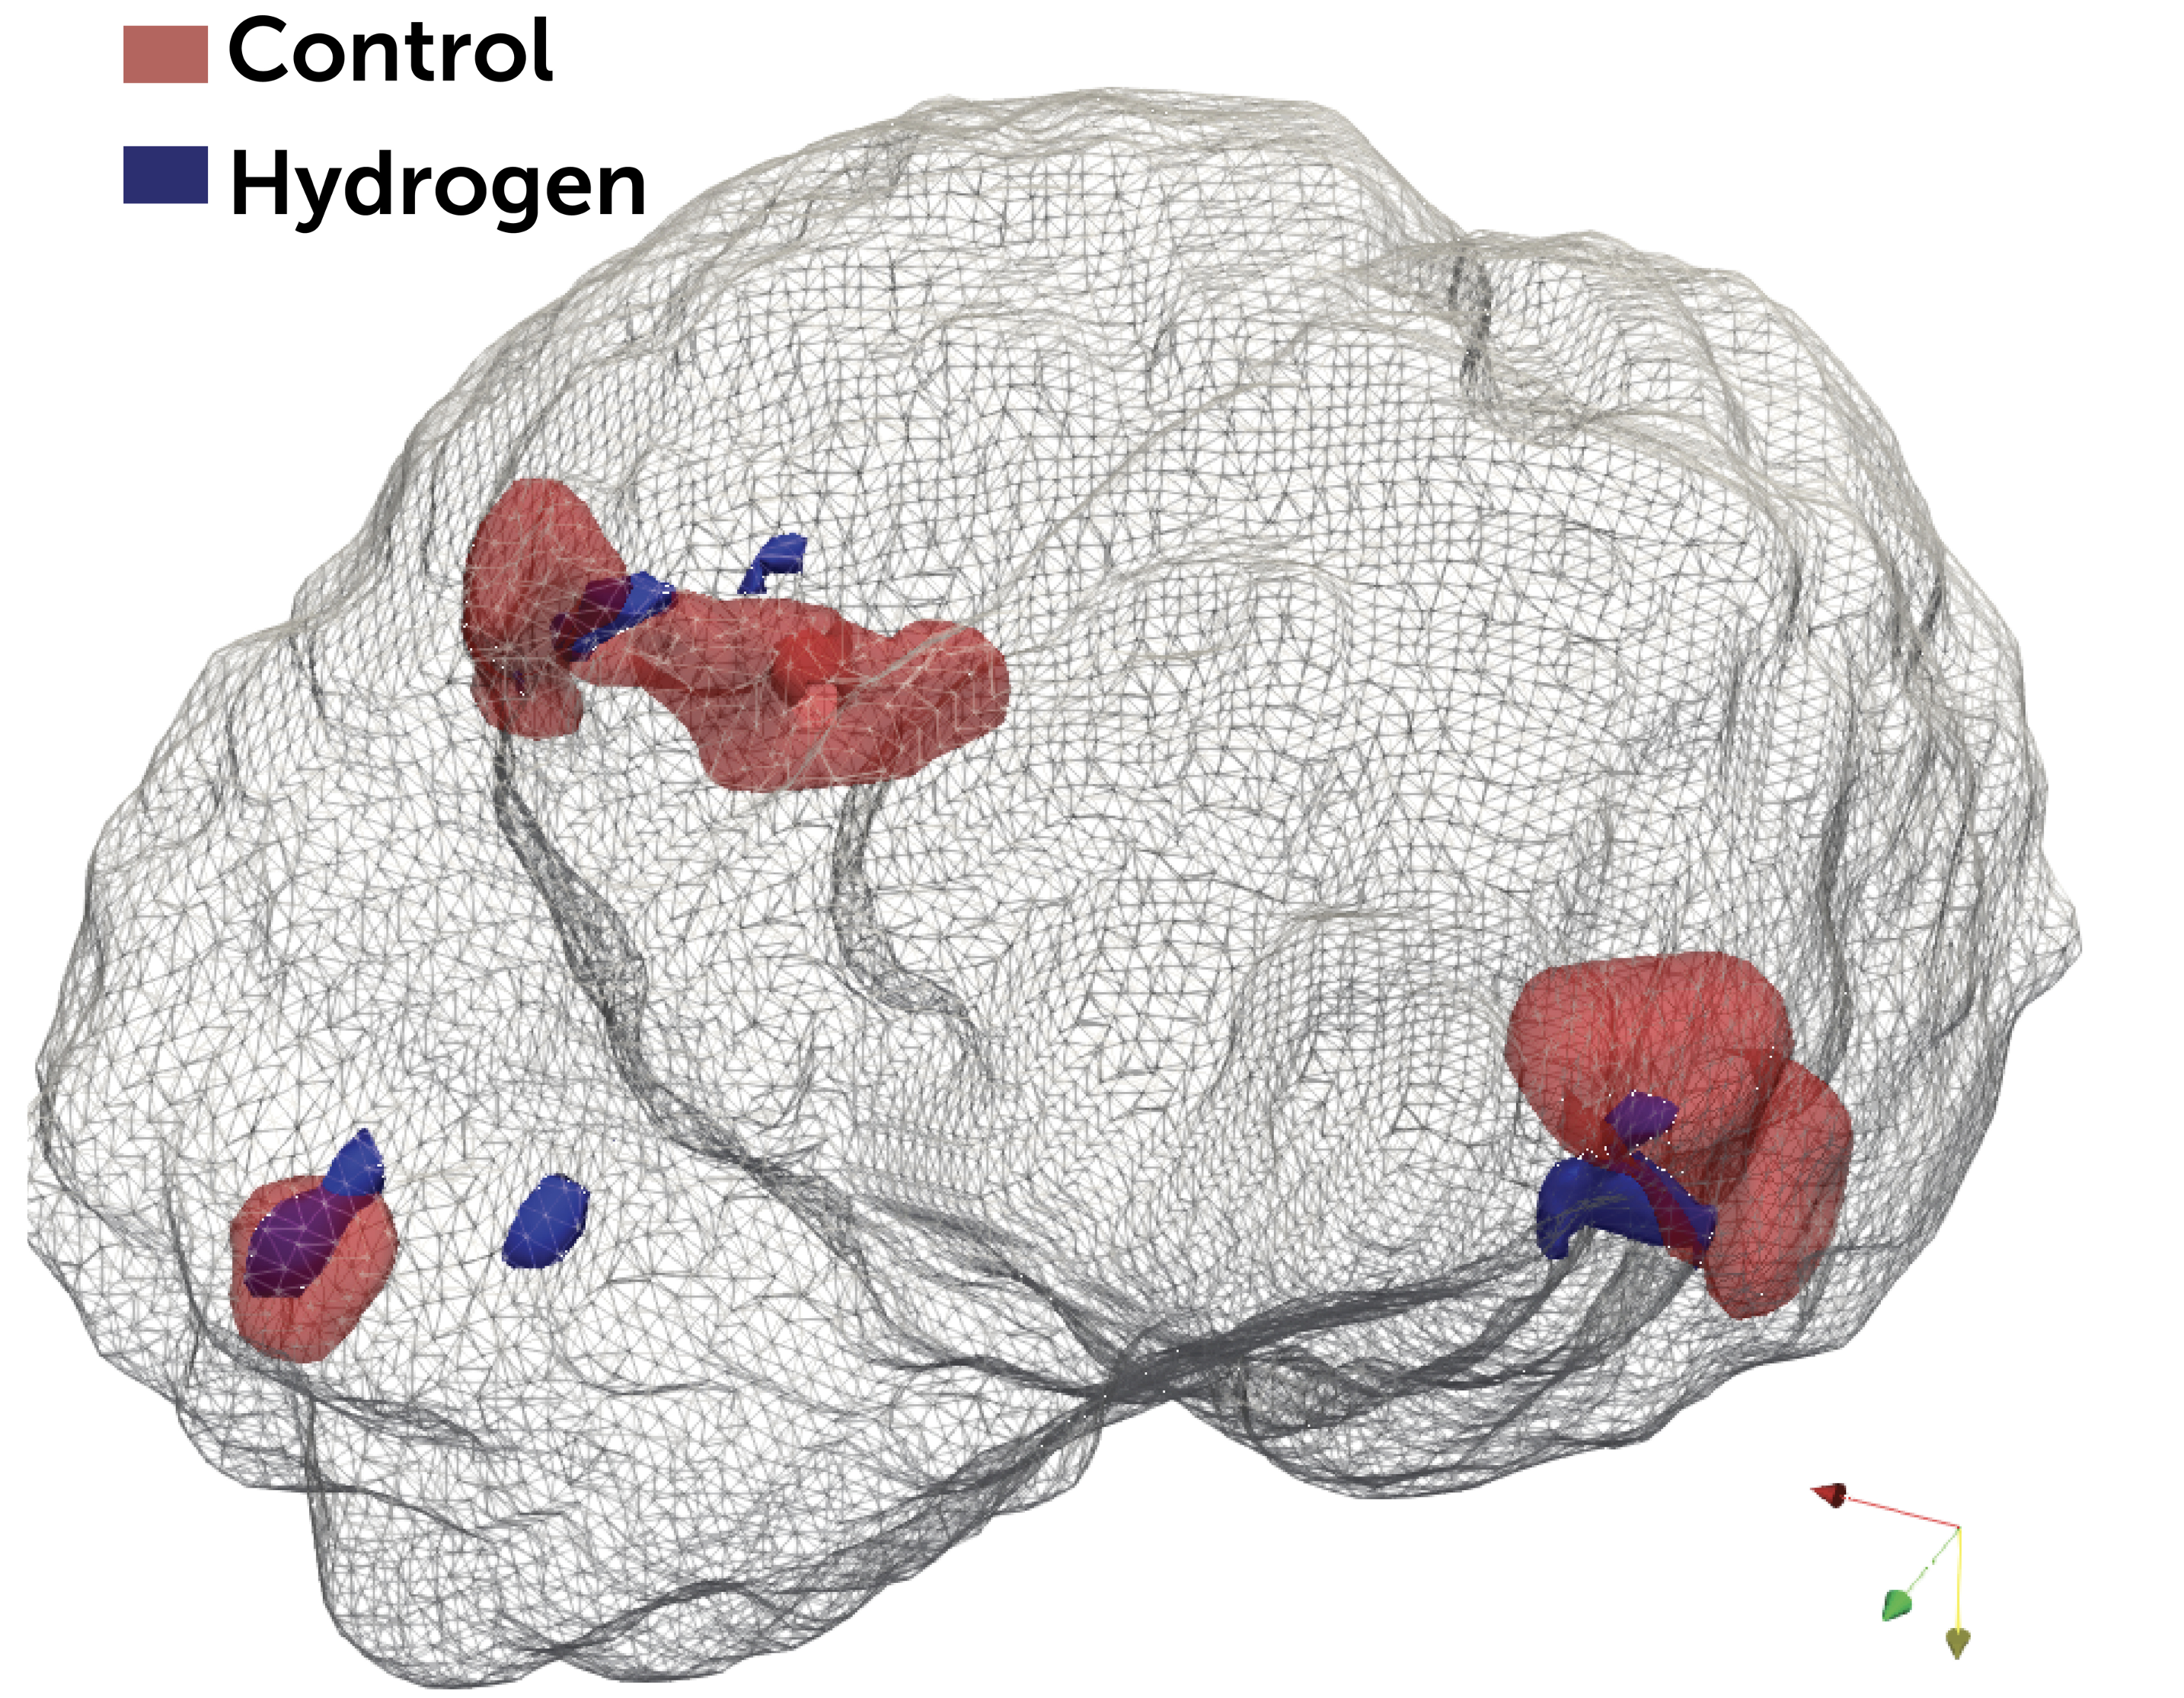 3D rendering of a brain with the parts highlighted in red and blue that the oxygen will target when using ECMO.